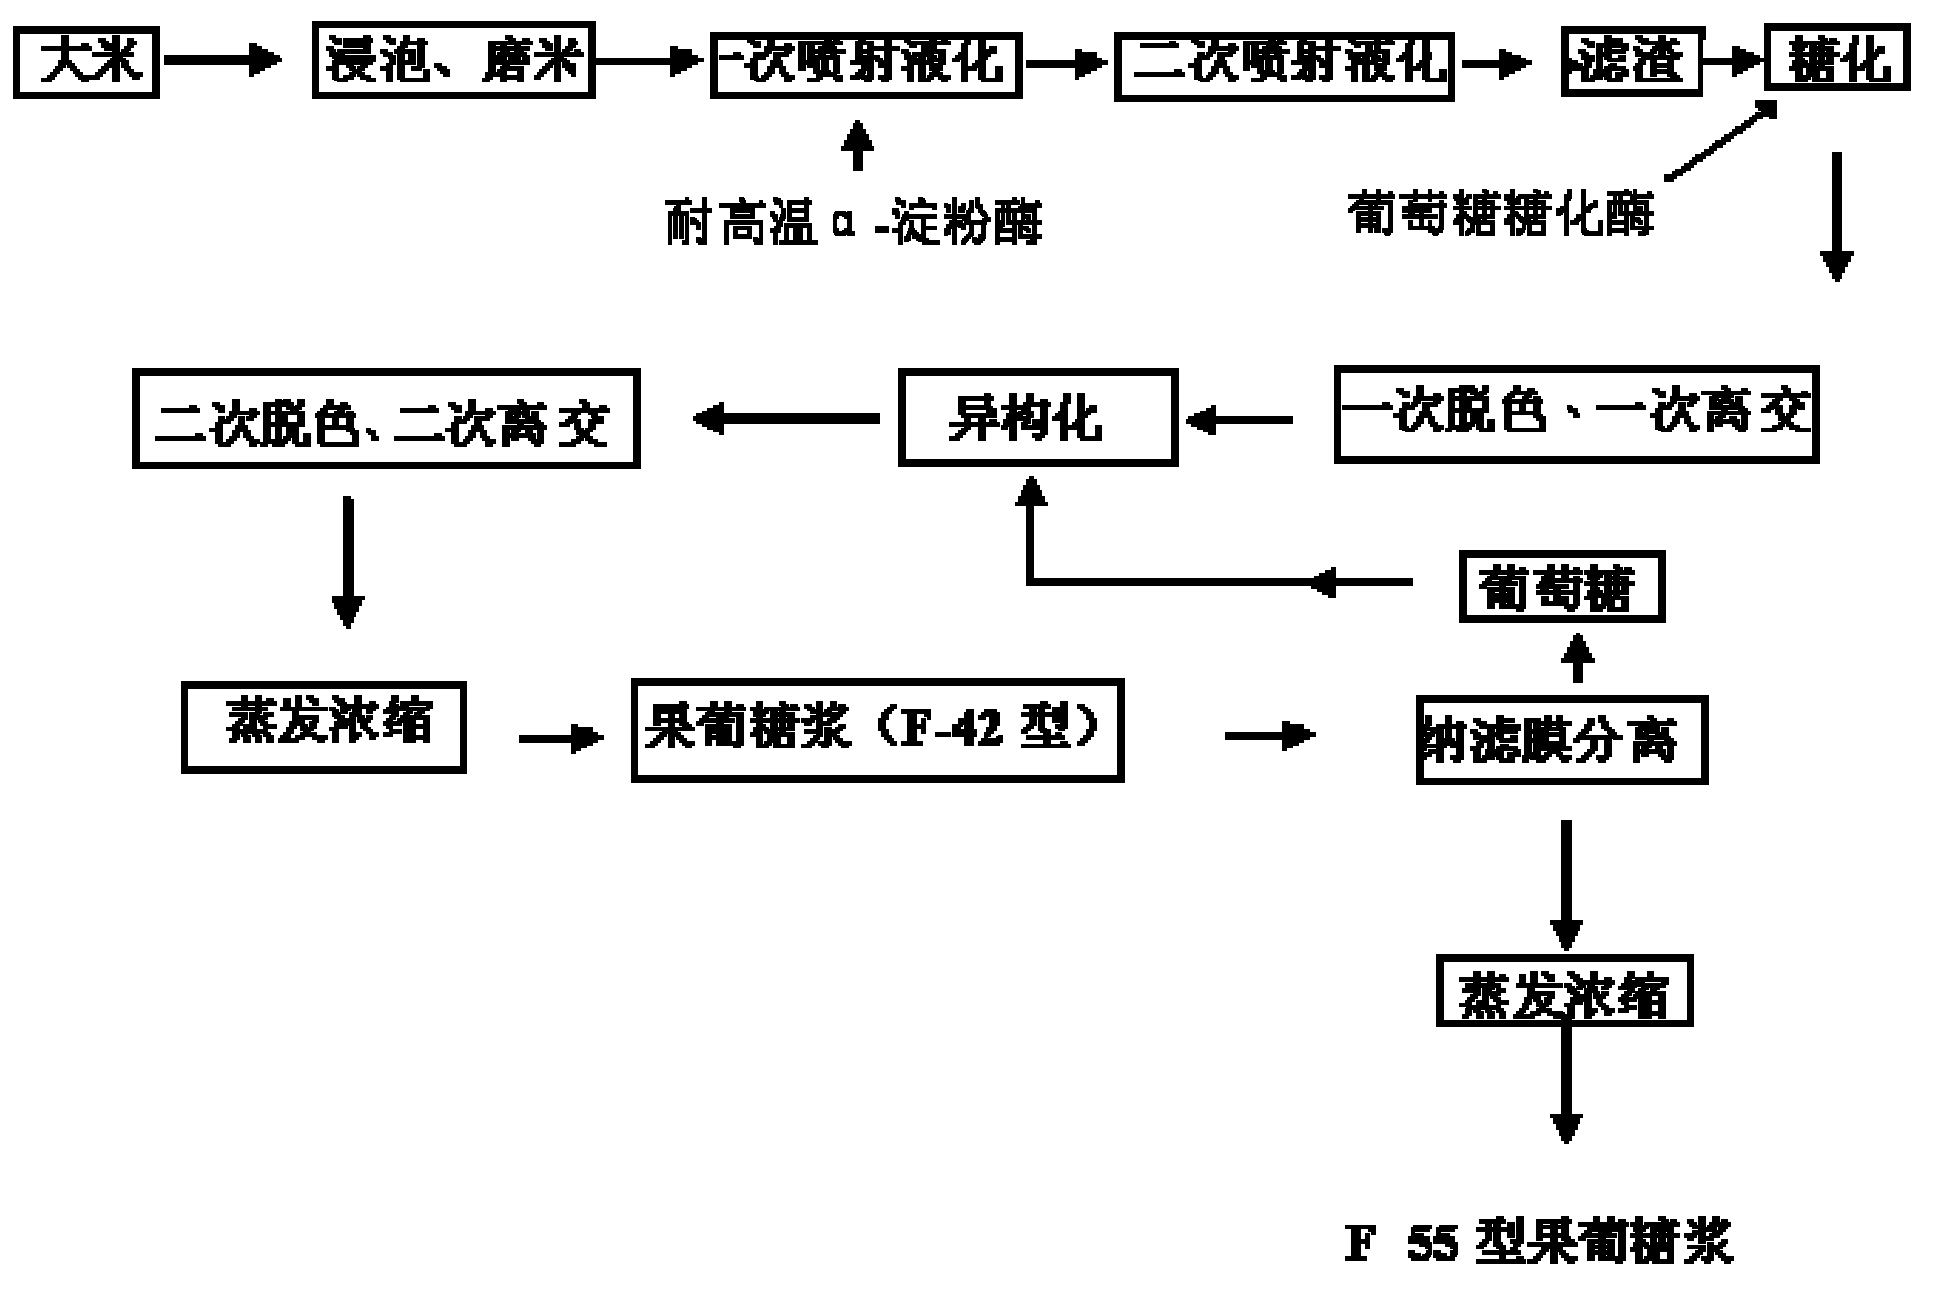 Process for producing high fructose syrup with a content of 55% with rice